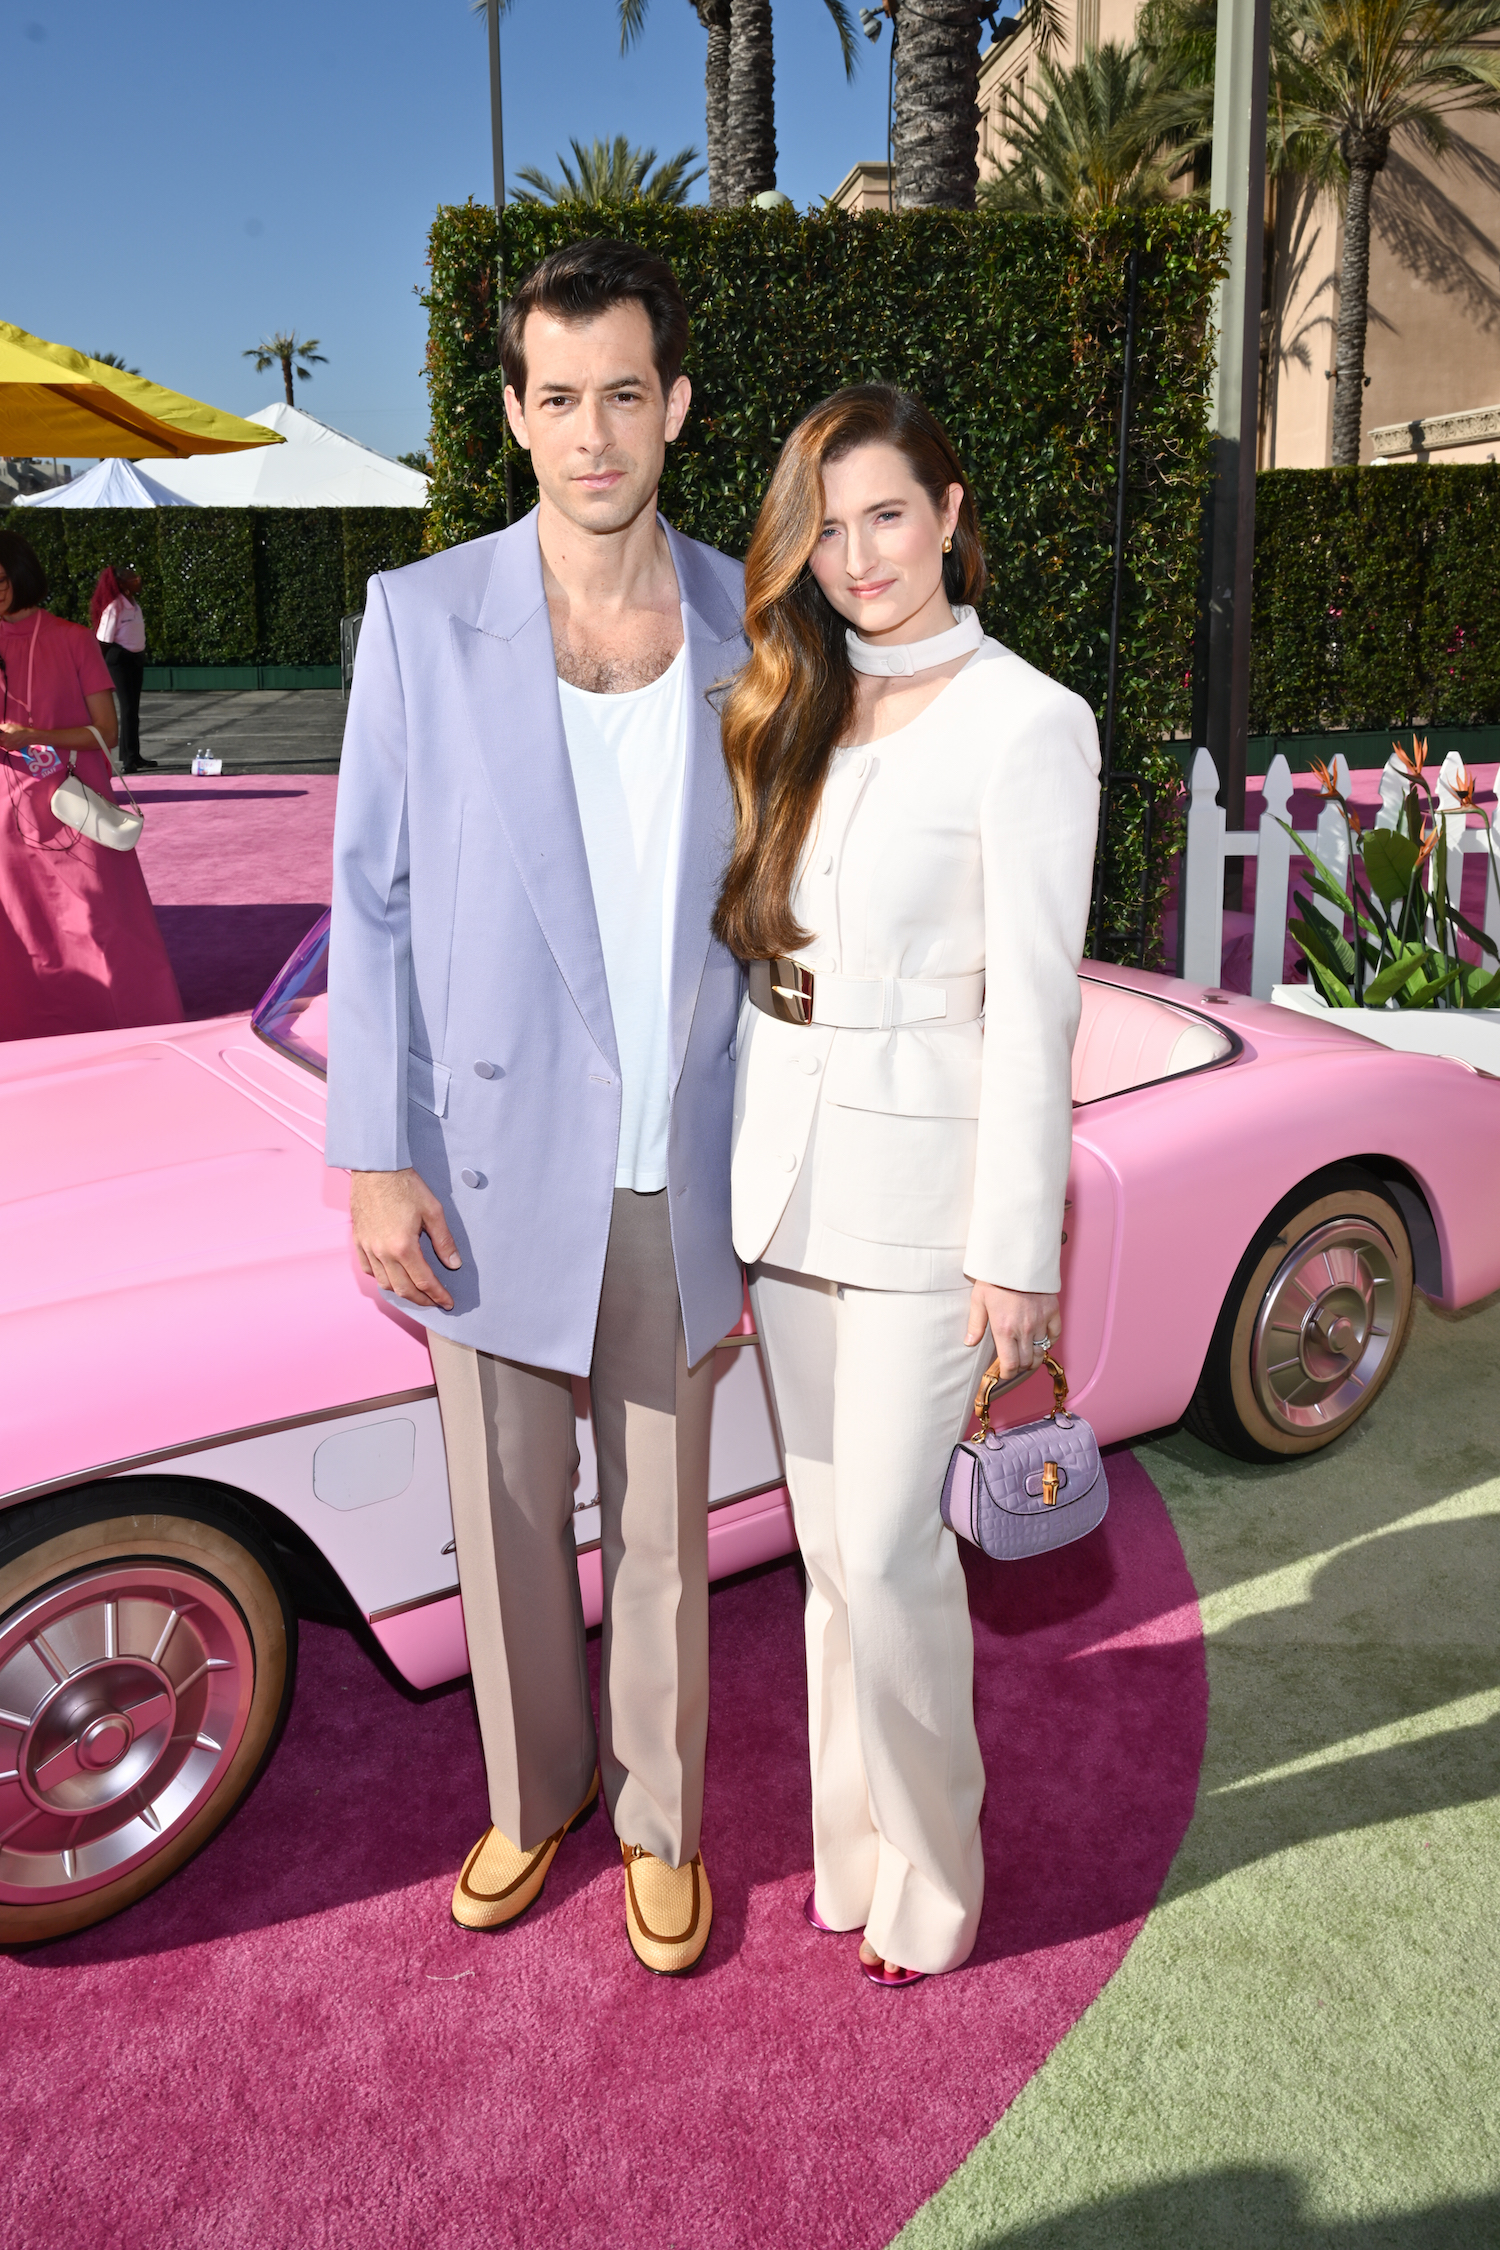 MARK RONSON wore a GUCCI Fall/winter 2023 jacket, pants and t-shirt and loafers with Horsebit detail. GRACE GUMMER wore a GUCCI jacket, pants and belt and a Gucci Bamboo 1947 handbag.